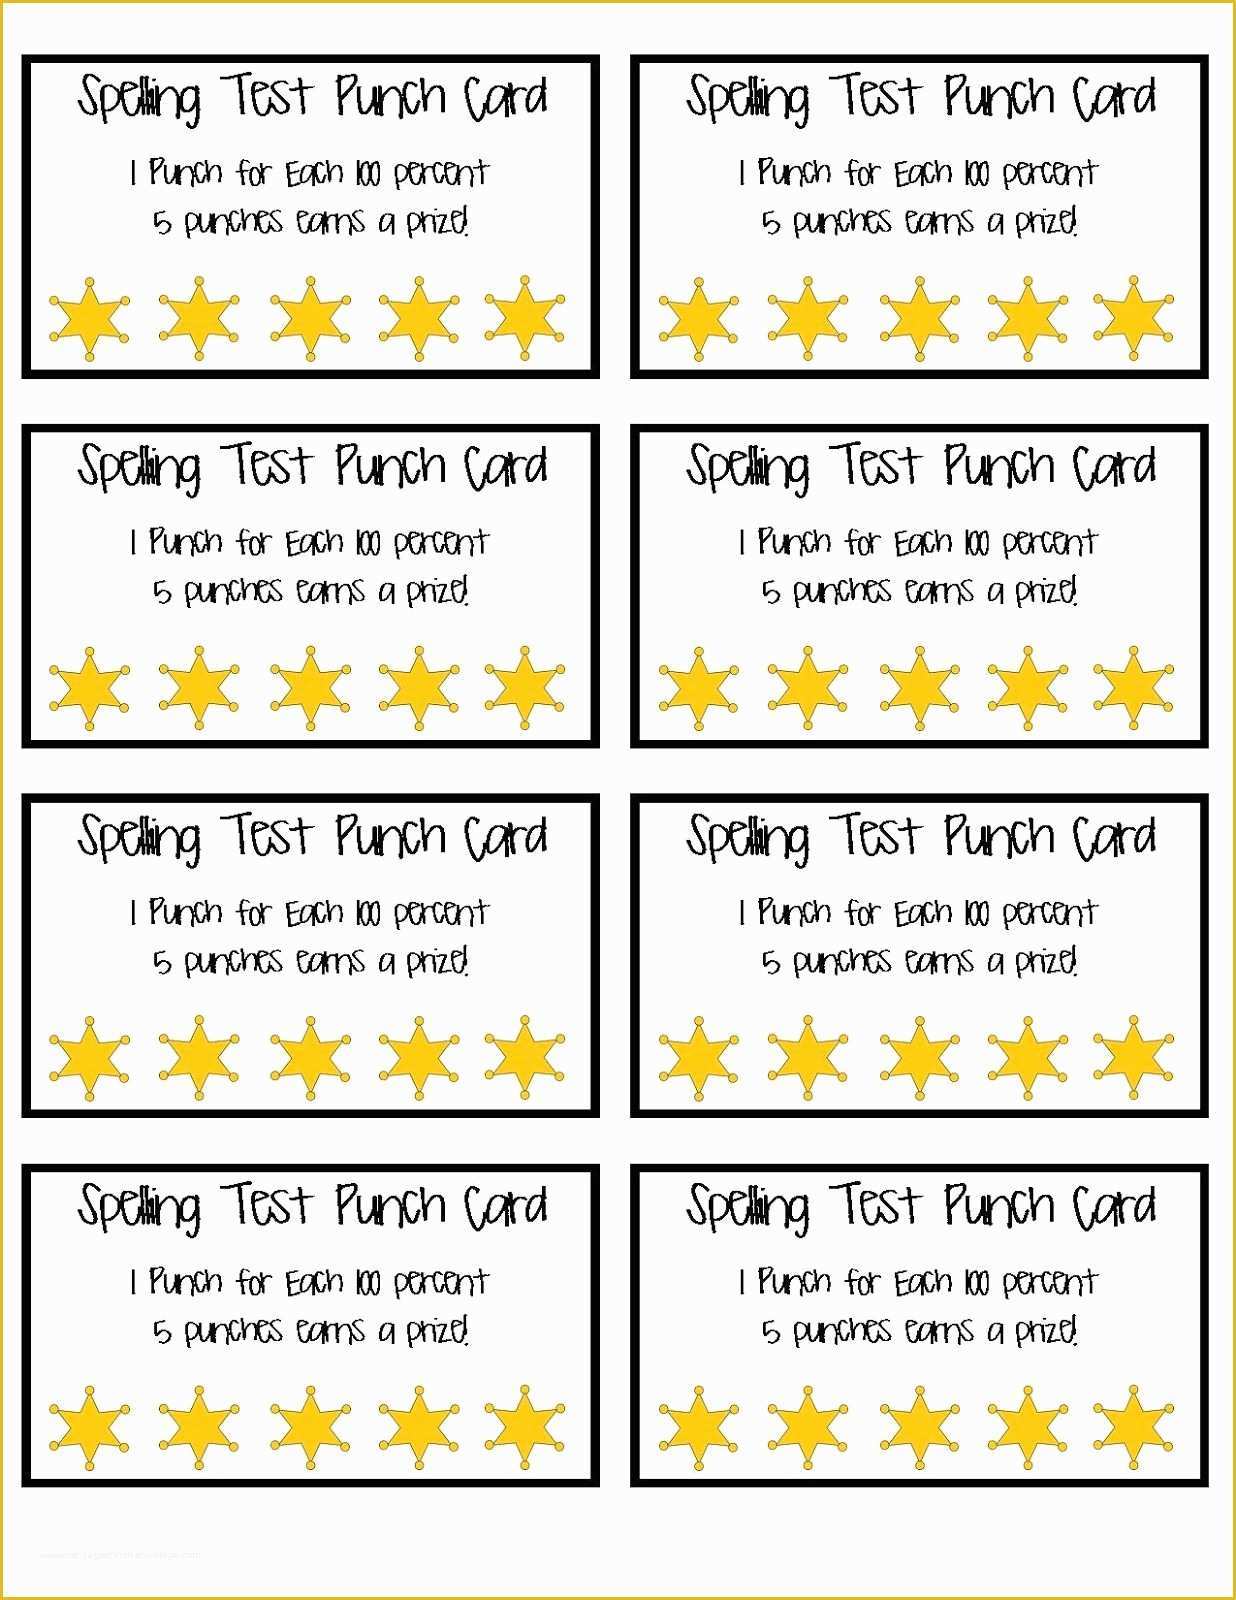 free microsoft word punch card template